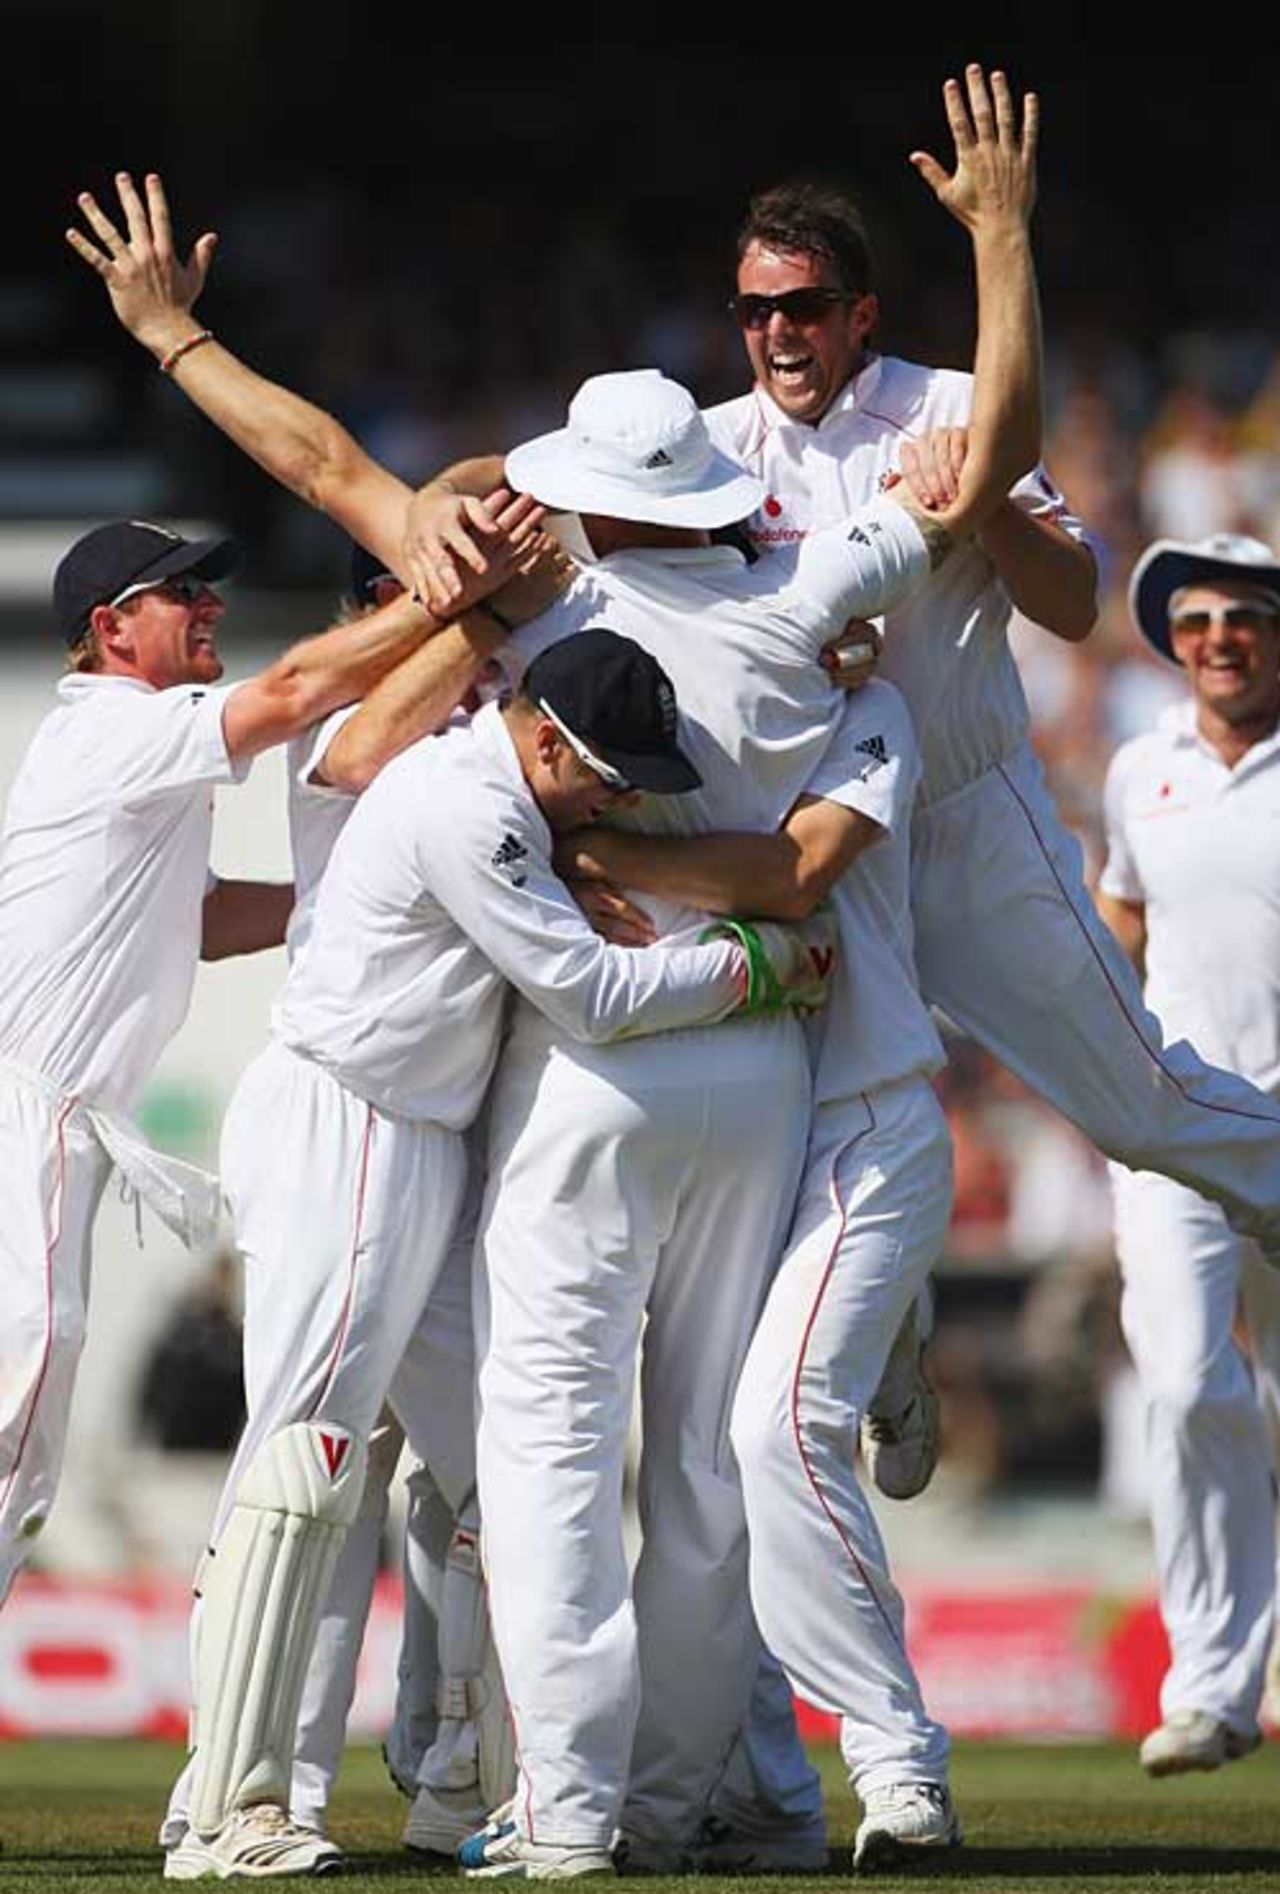 Team-mates engulf Andrew Flintoff after his dead-eye throw removed Ricky Ponting, England v Australia, 5th Test, The Oval, 4th day, August 23, 2009